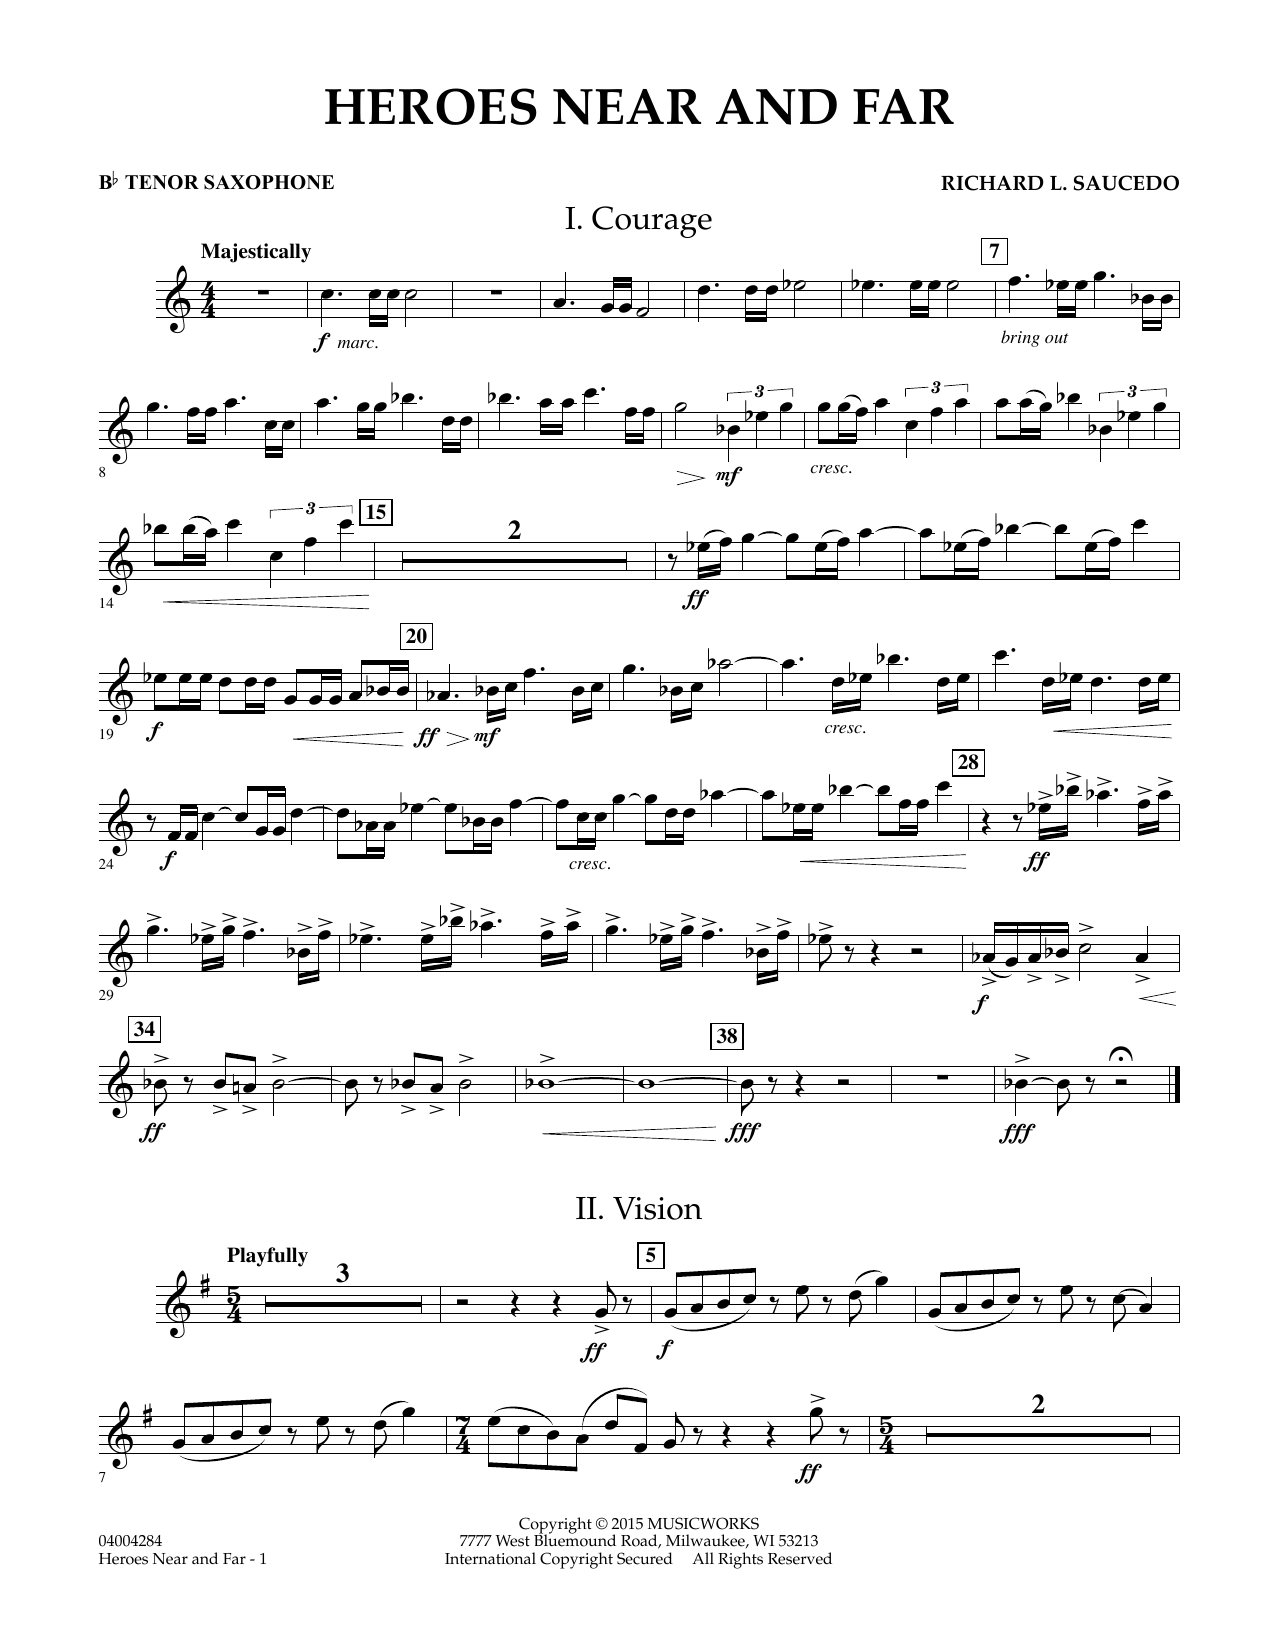 Richard L. Saucedo Heroes Near and Far - Bb Tenor Saxophone sheet music notes and chords. Download Printable PDF.